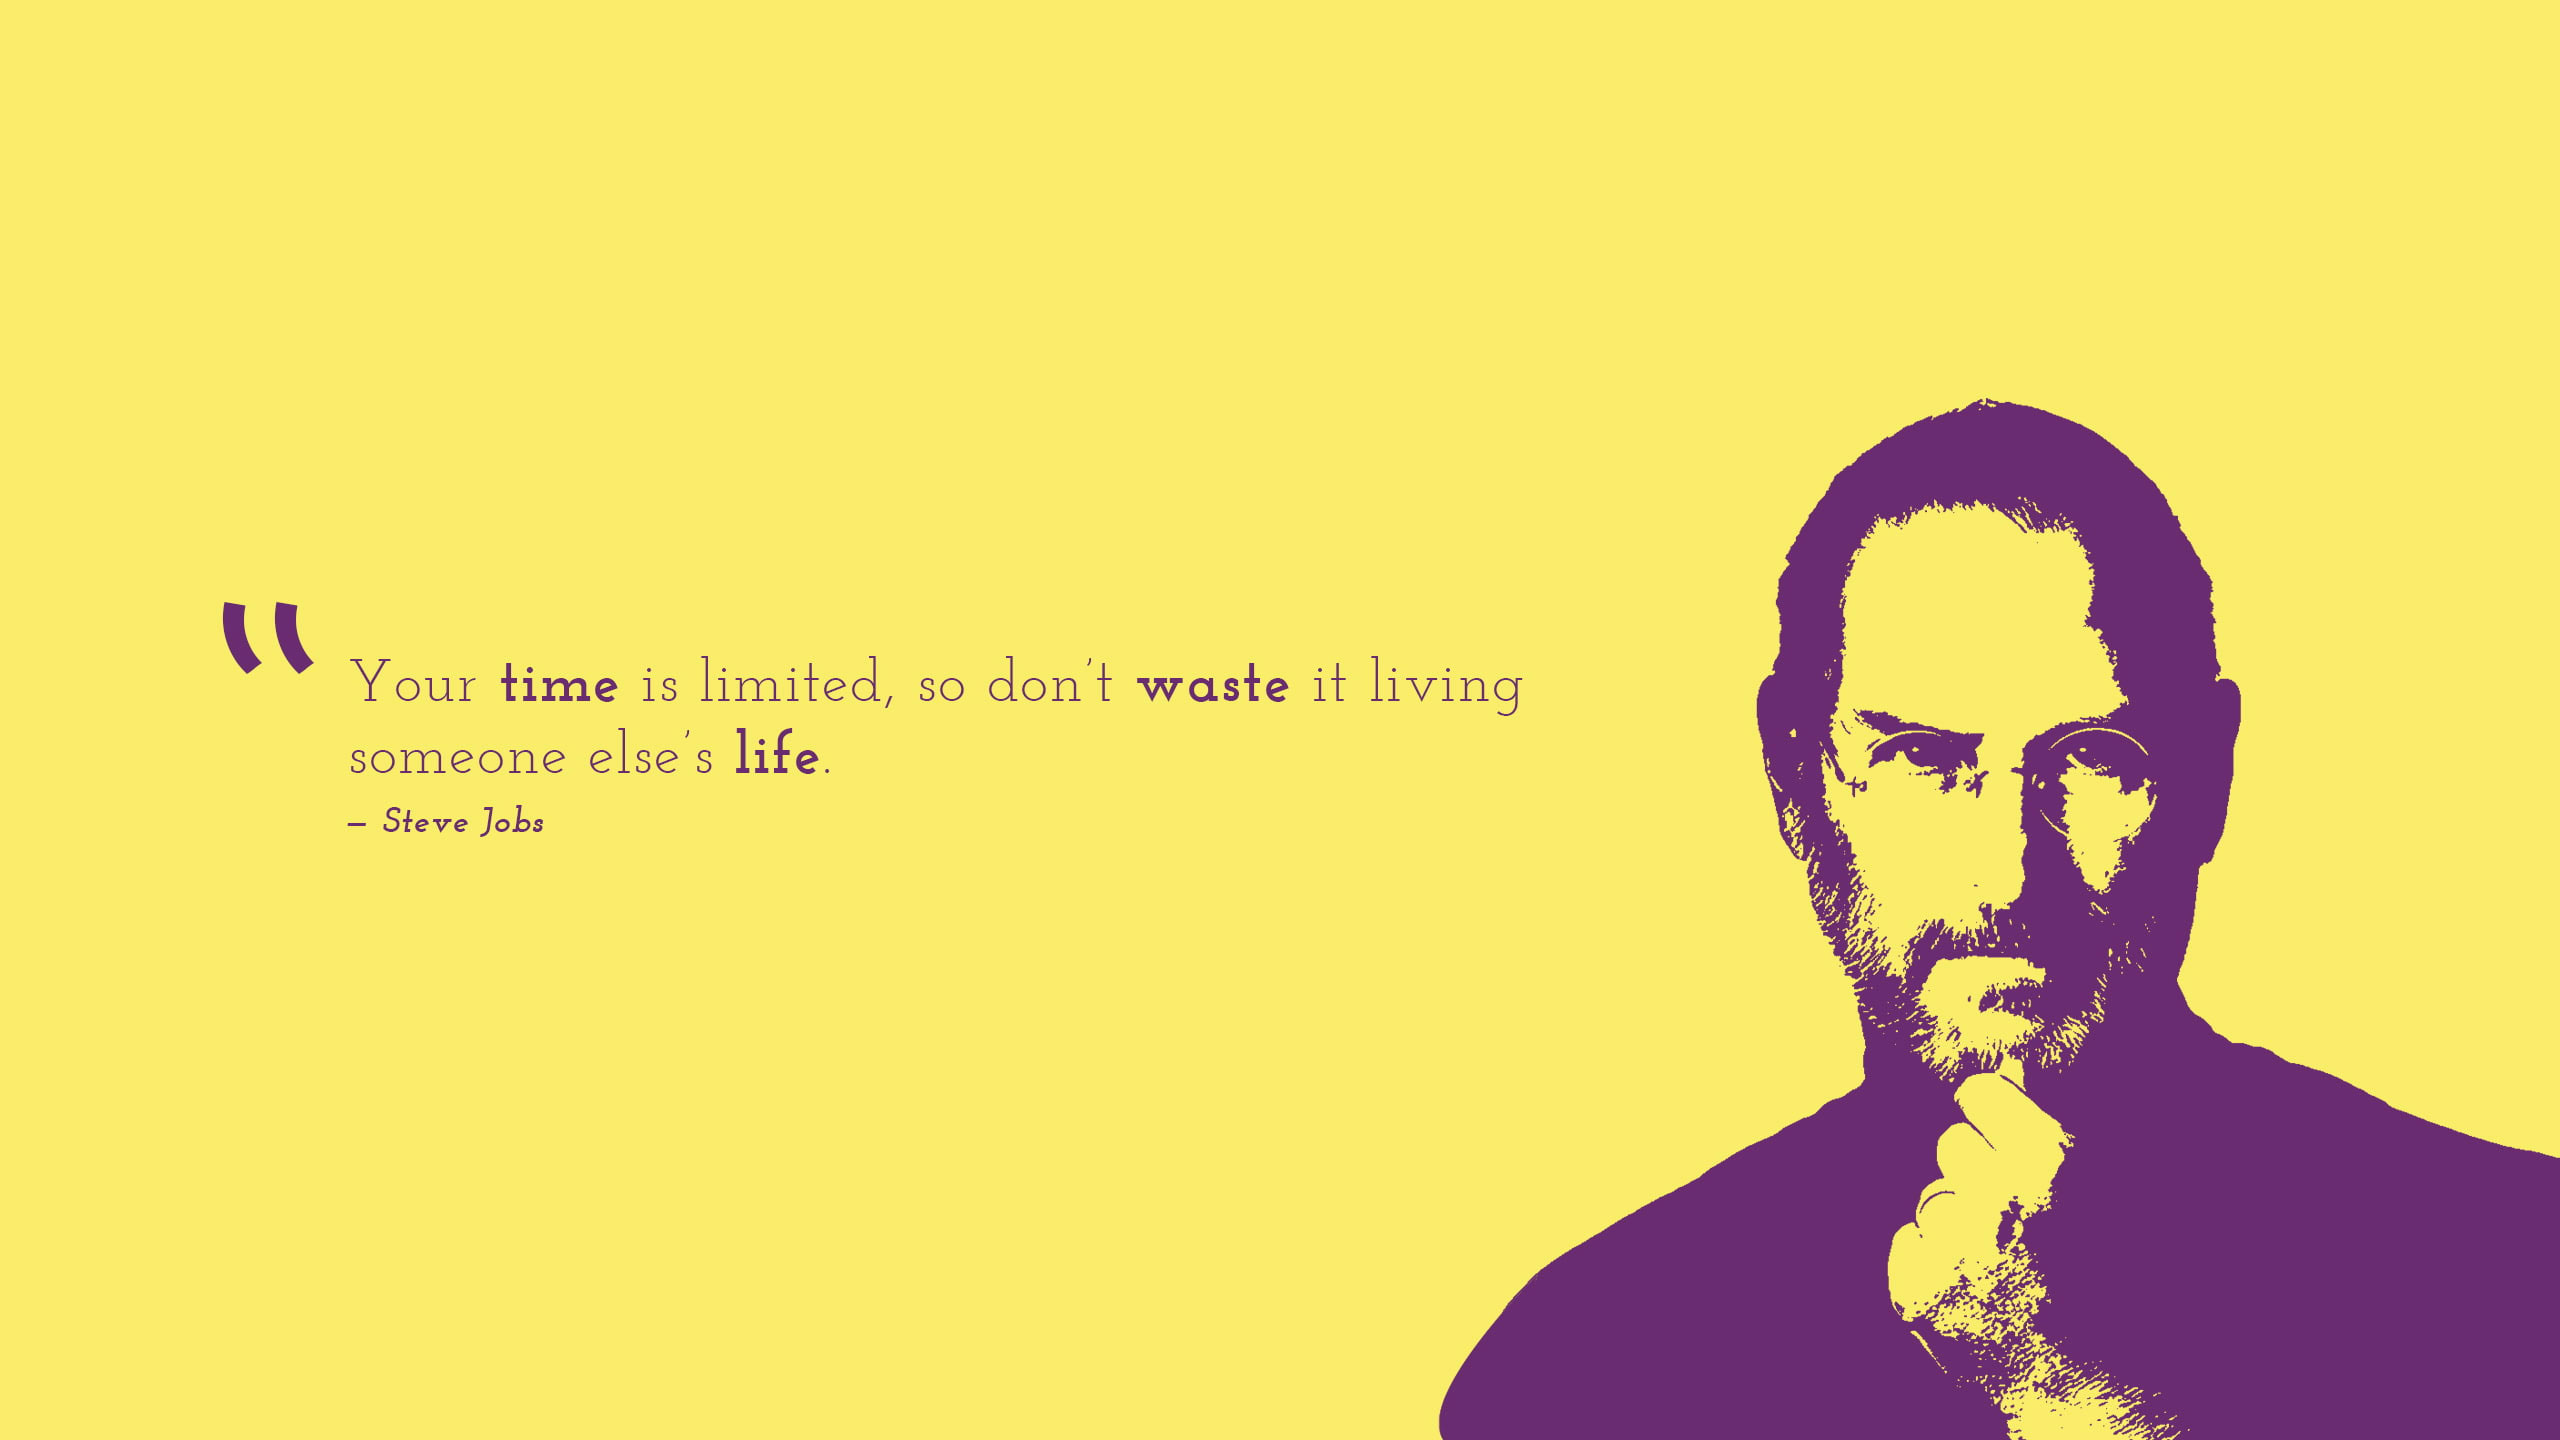 Wallpaper Steve Jobs Illustration With Quote Letter, Time - Wallpaperforu